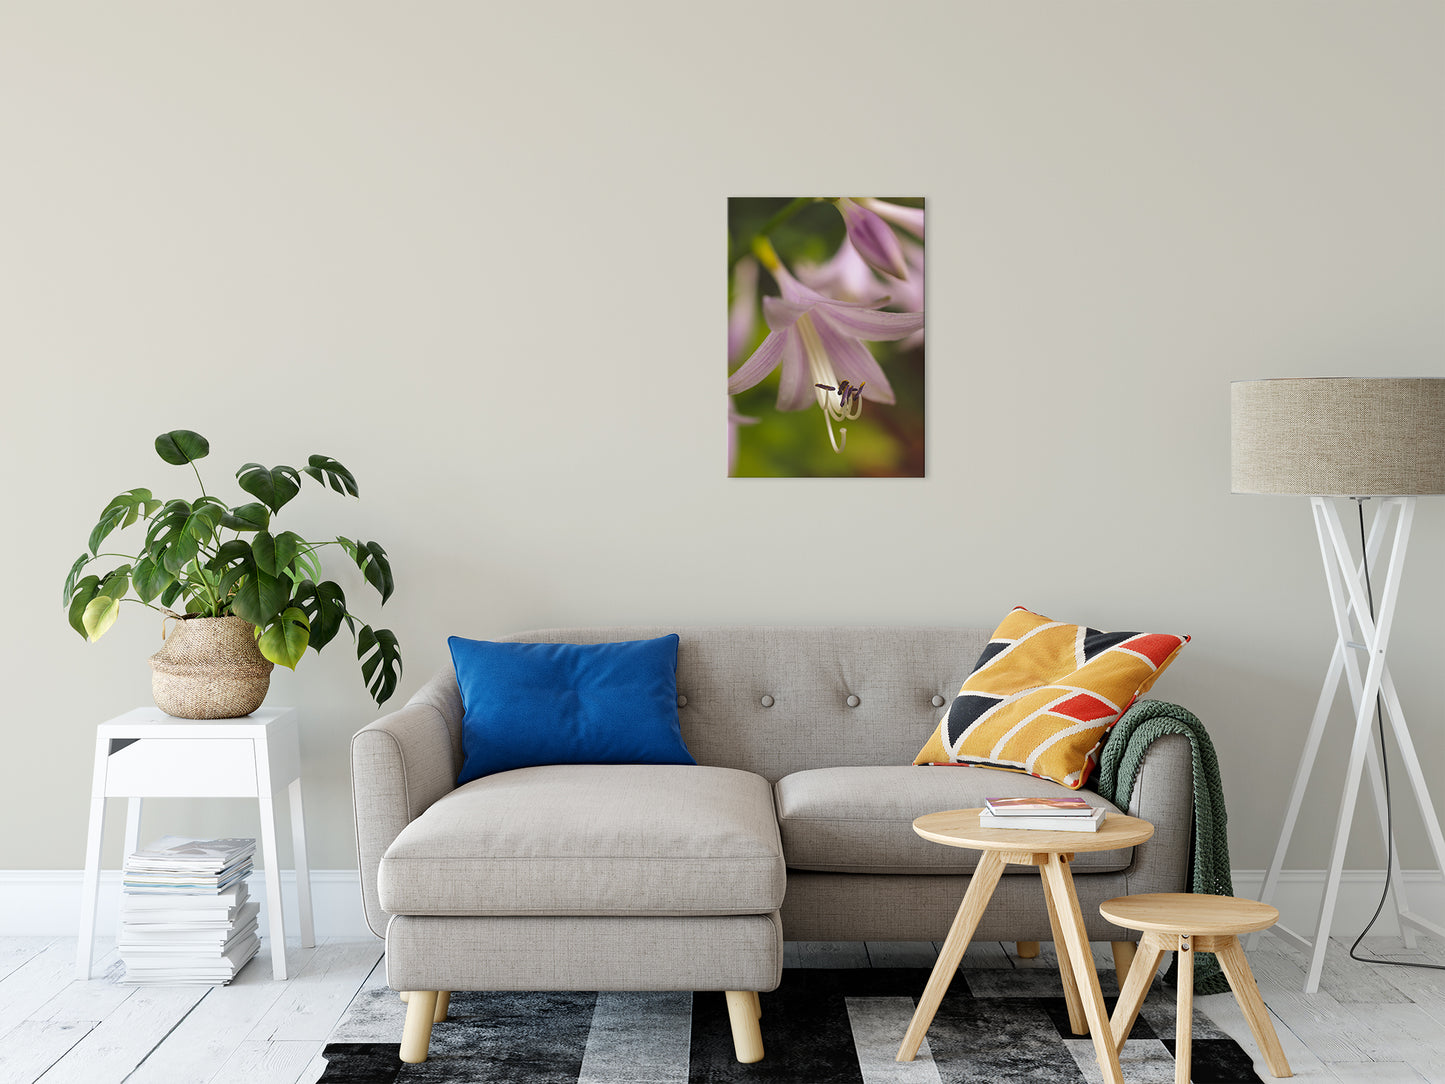 Close-up Hosta Bloom Nature / Floral Photo Fine Art Canvas Wall Art Prints 20" x 24" - PIPAFINEART